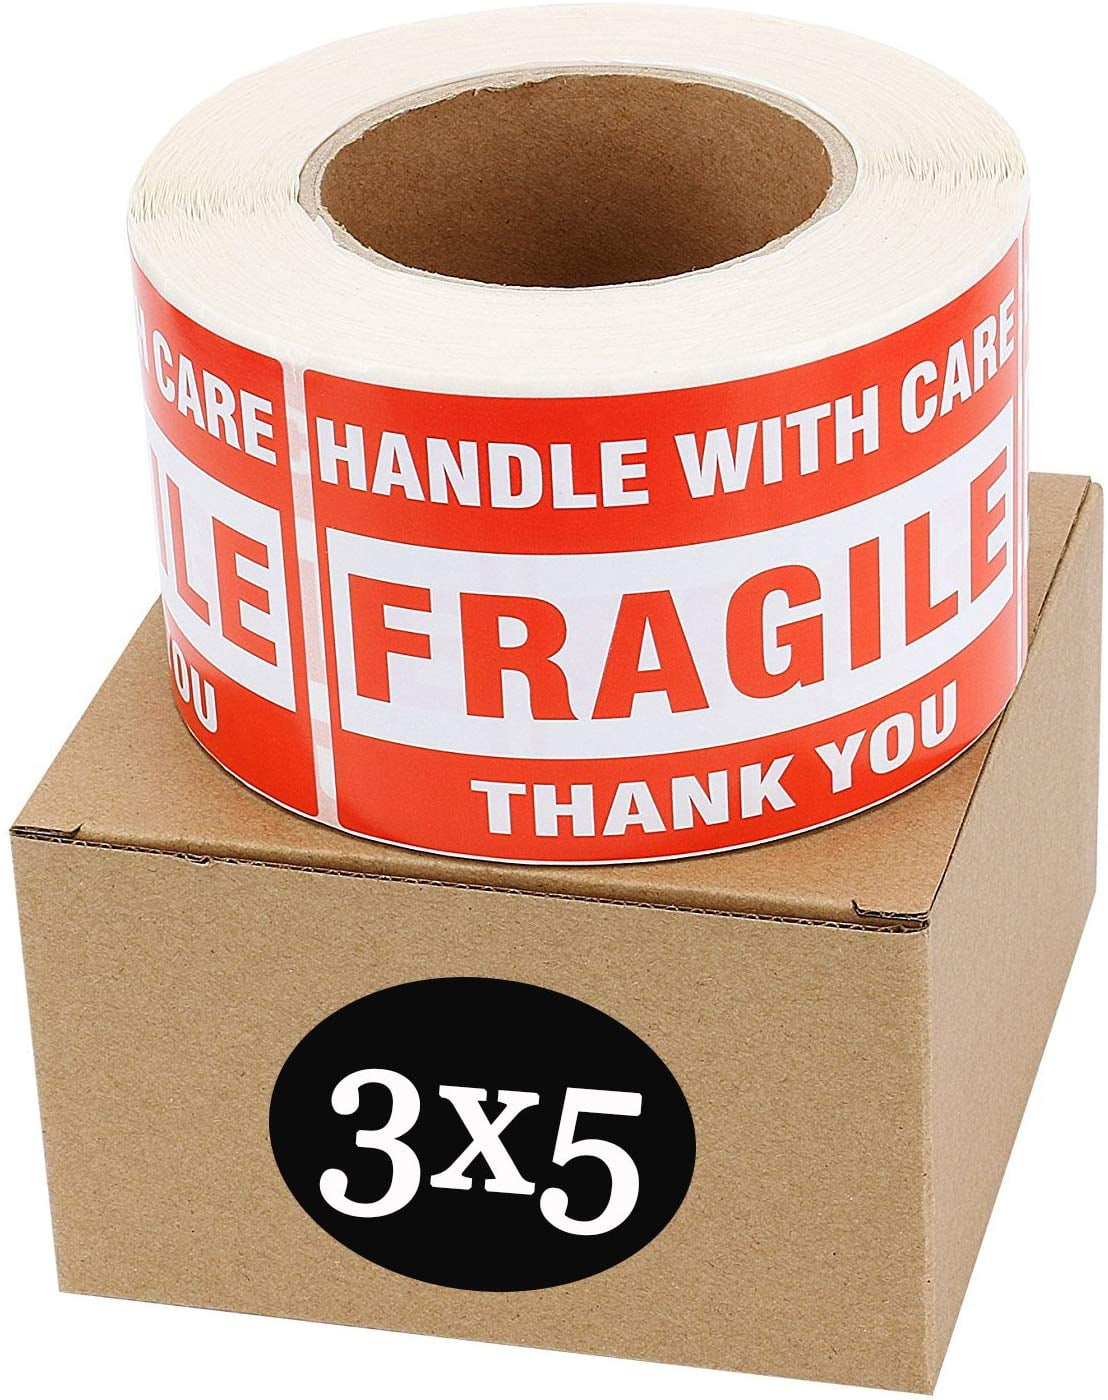 1 Roll Glass 500 Labels Per Roll Handle With Care Labels/Stickers 3 x 5 Red/White Fragile 